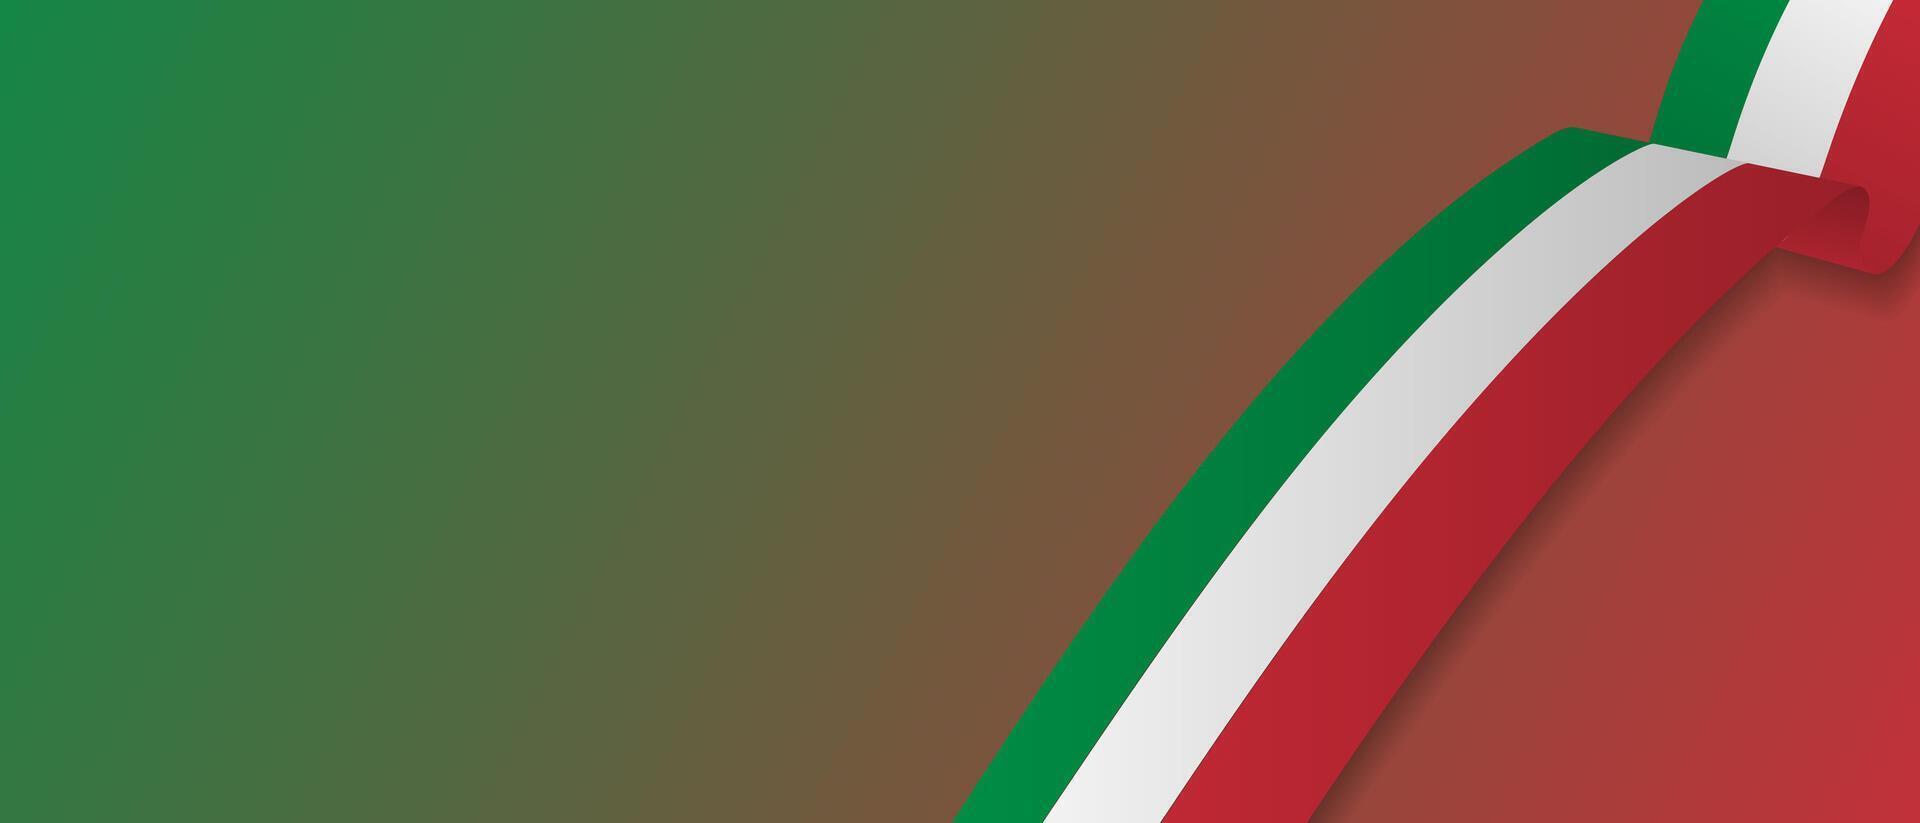 3d Realistic Italy Flag Ribbons poster template on gradient background for copy space. vector